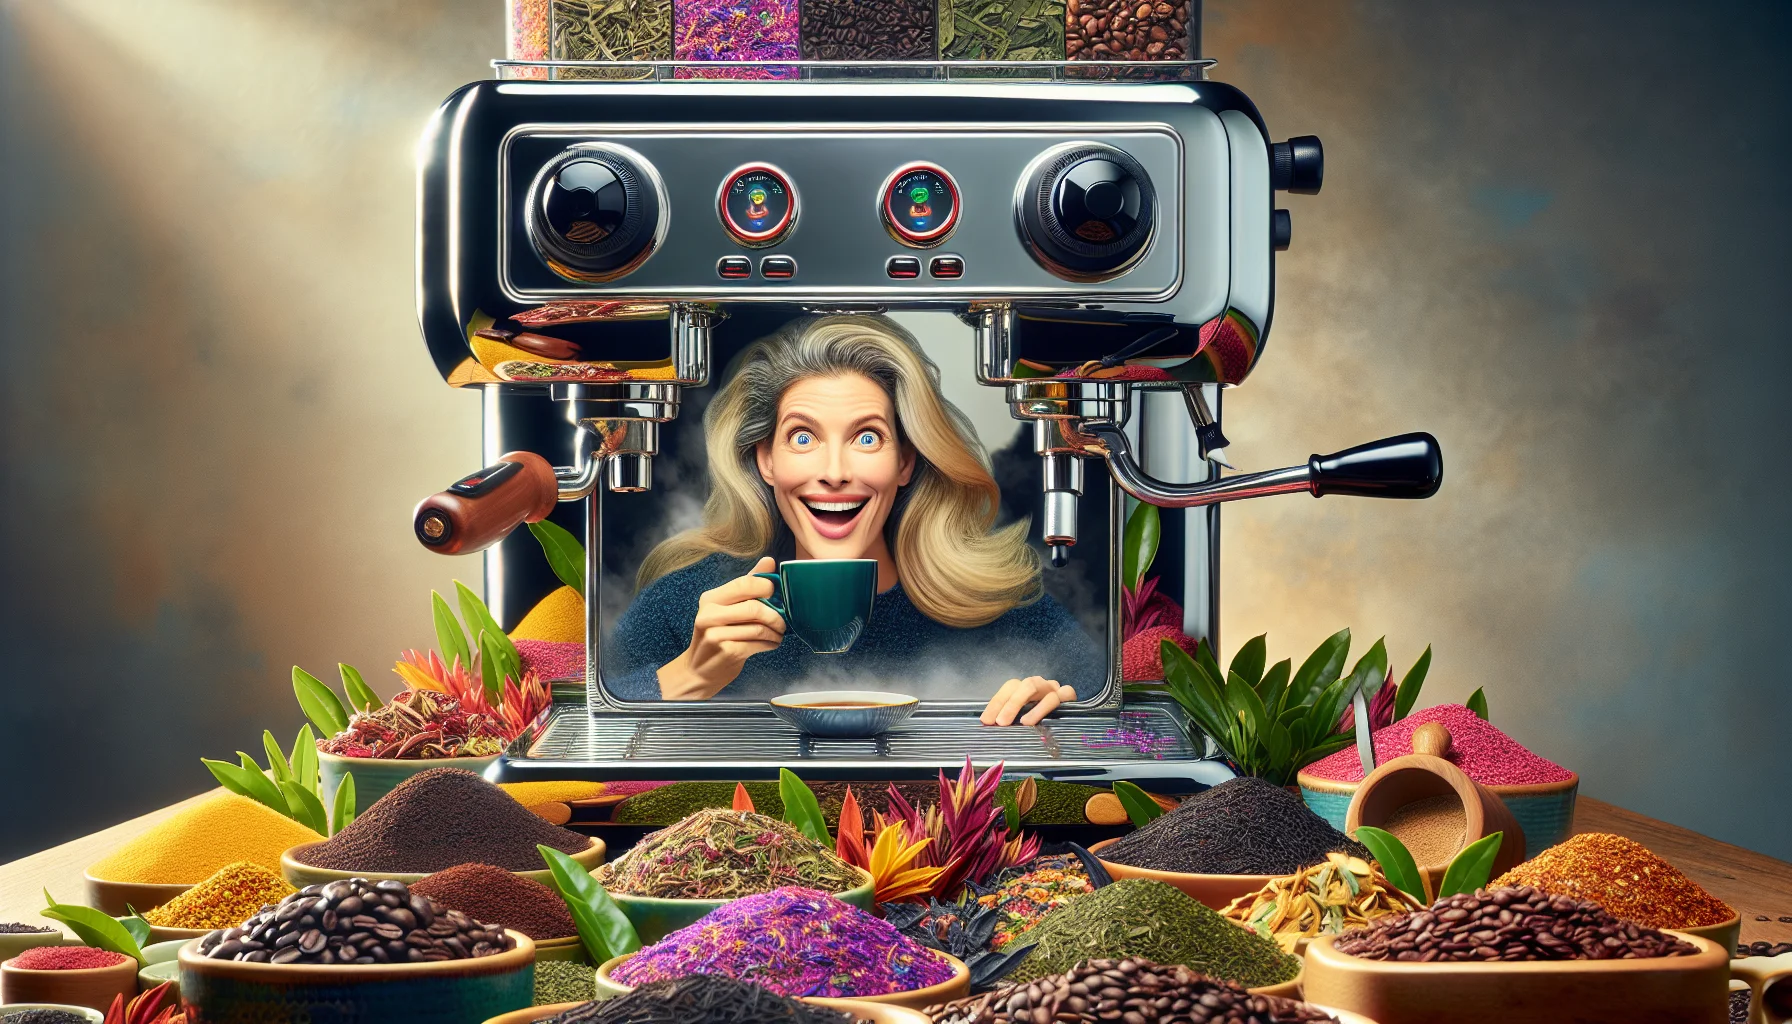 Create a humorous scenario centered around tea and coffee brewing. In this scene, a woman who has a similar physique to a well-known blogger is being reflected in the shiny surface of a giant espresso machine. Her experience in brewing and her excitement for the products are evident. She's surrounded by a variety of colorful tea leaves and aromatic coffee beans, causing an enticing cacophony of scents in the air.